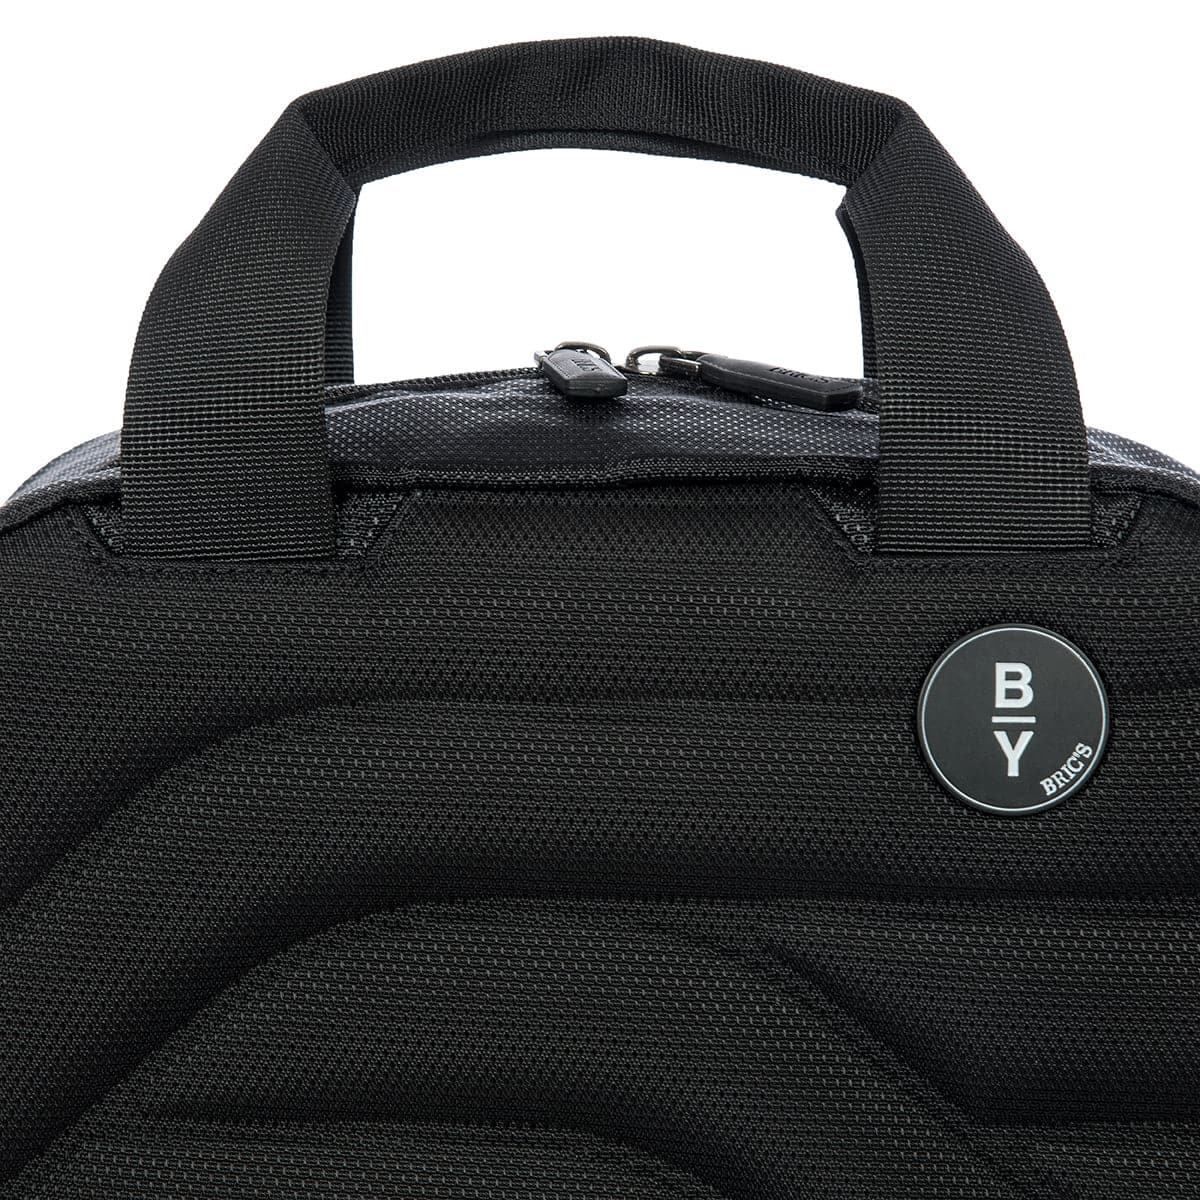 Bric's Ulisse Backpack